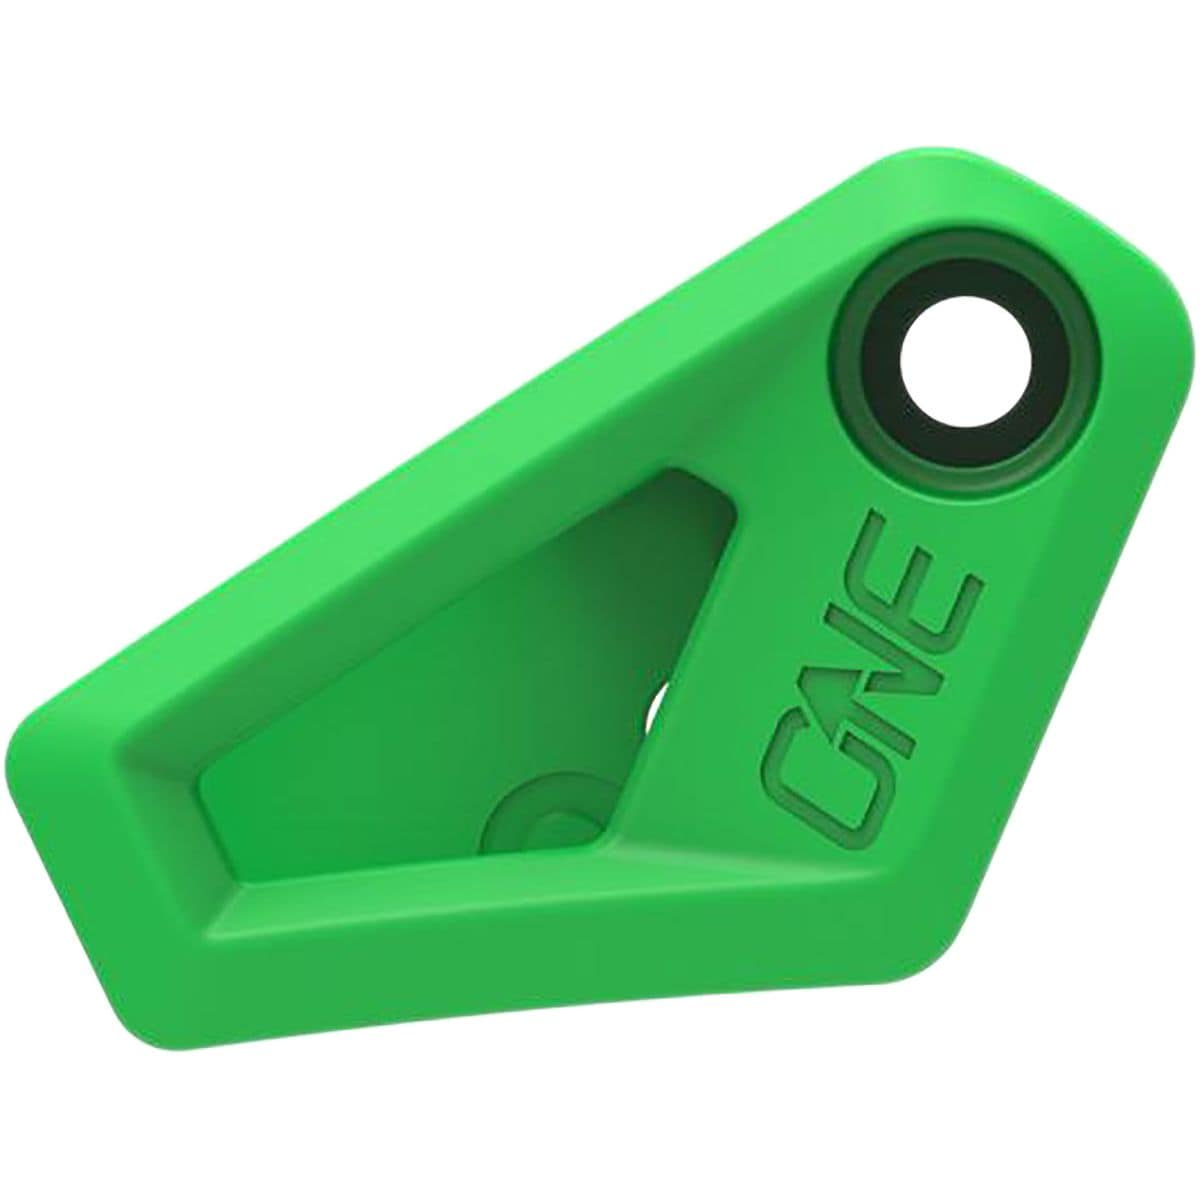 OneUp Components Oneup Chainguide Top Kit - V2 Green, One size